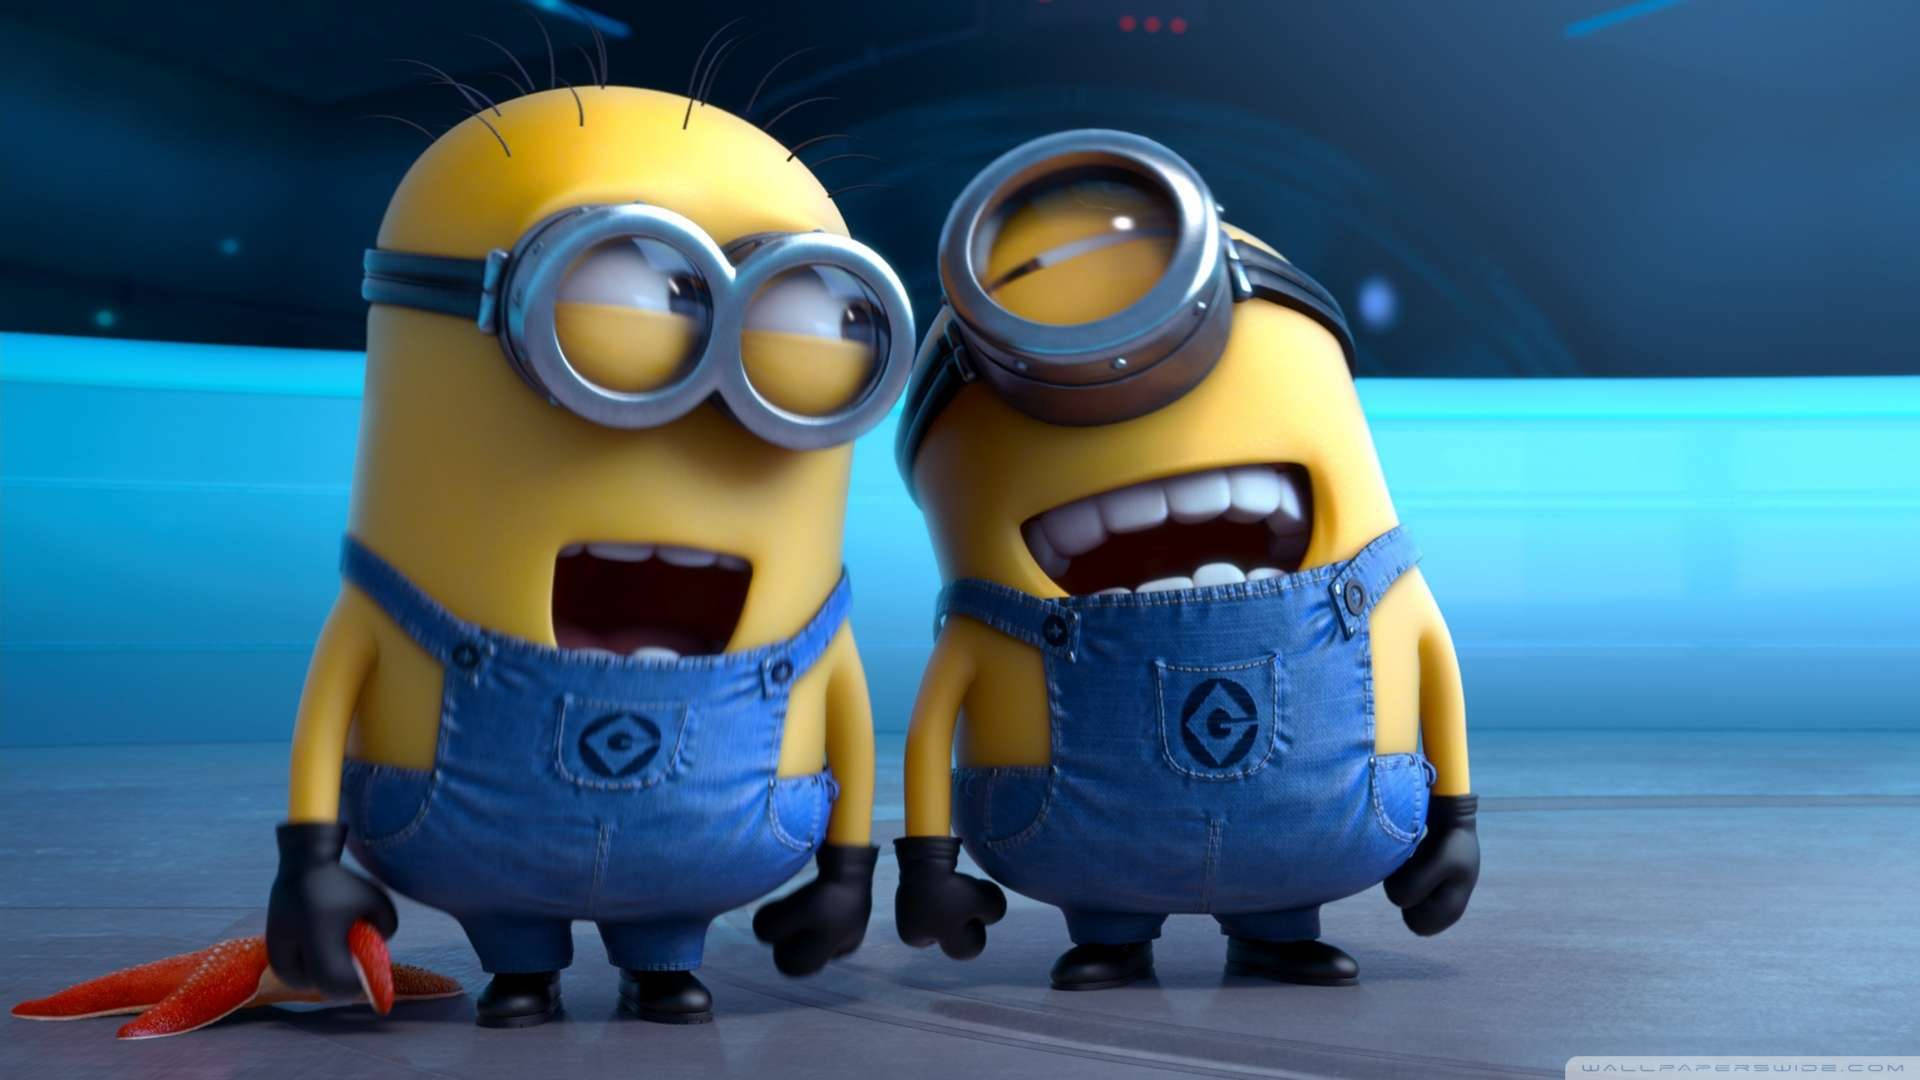 Minions from the Despicable Me franchise in stunning 1080P Wallpaper